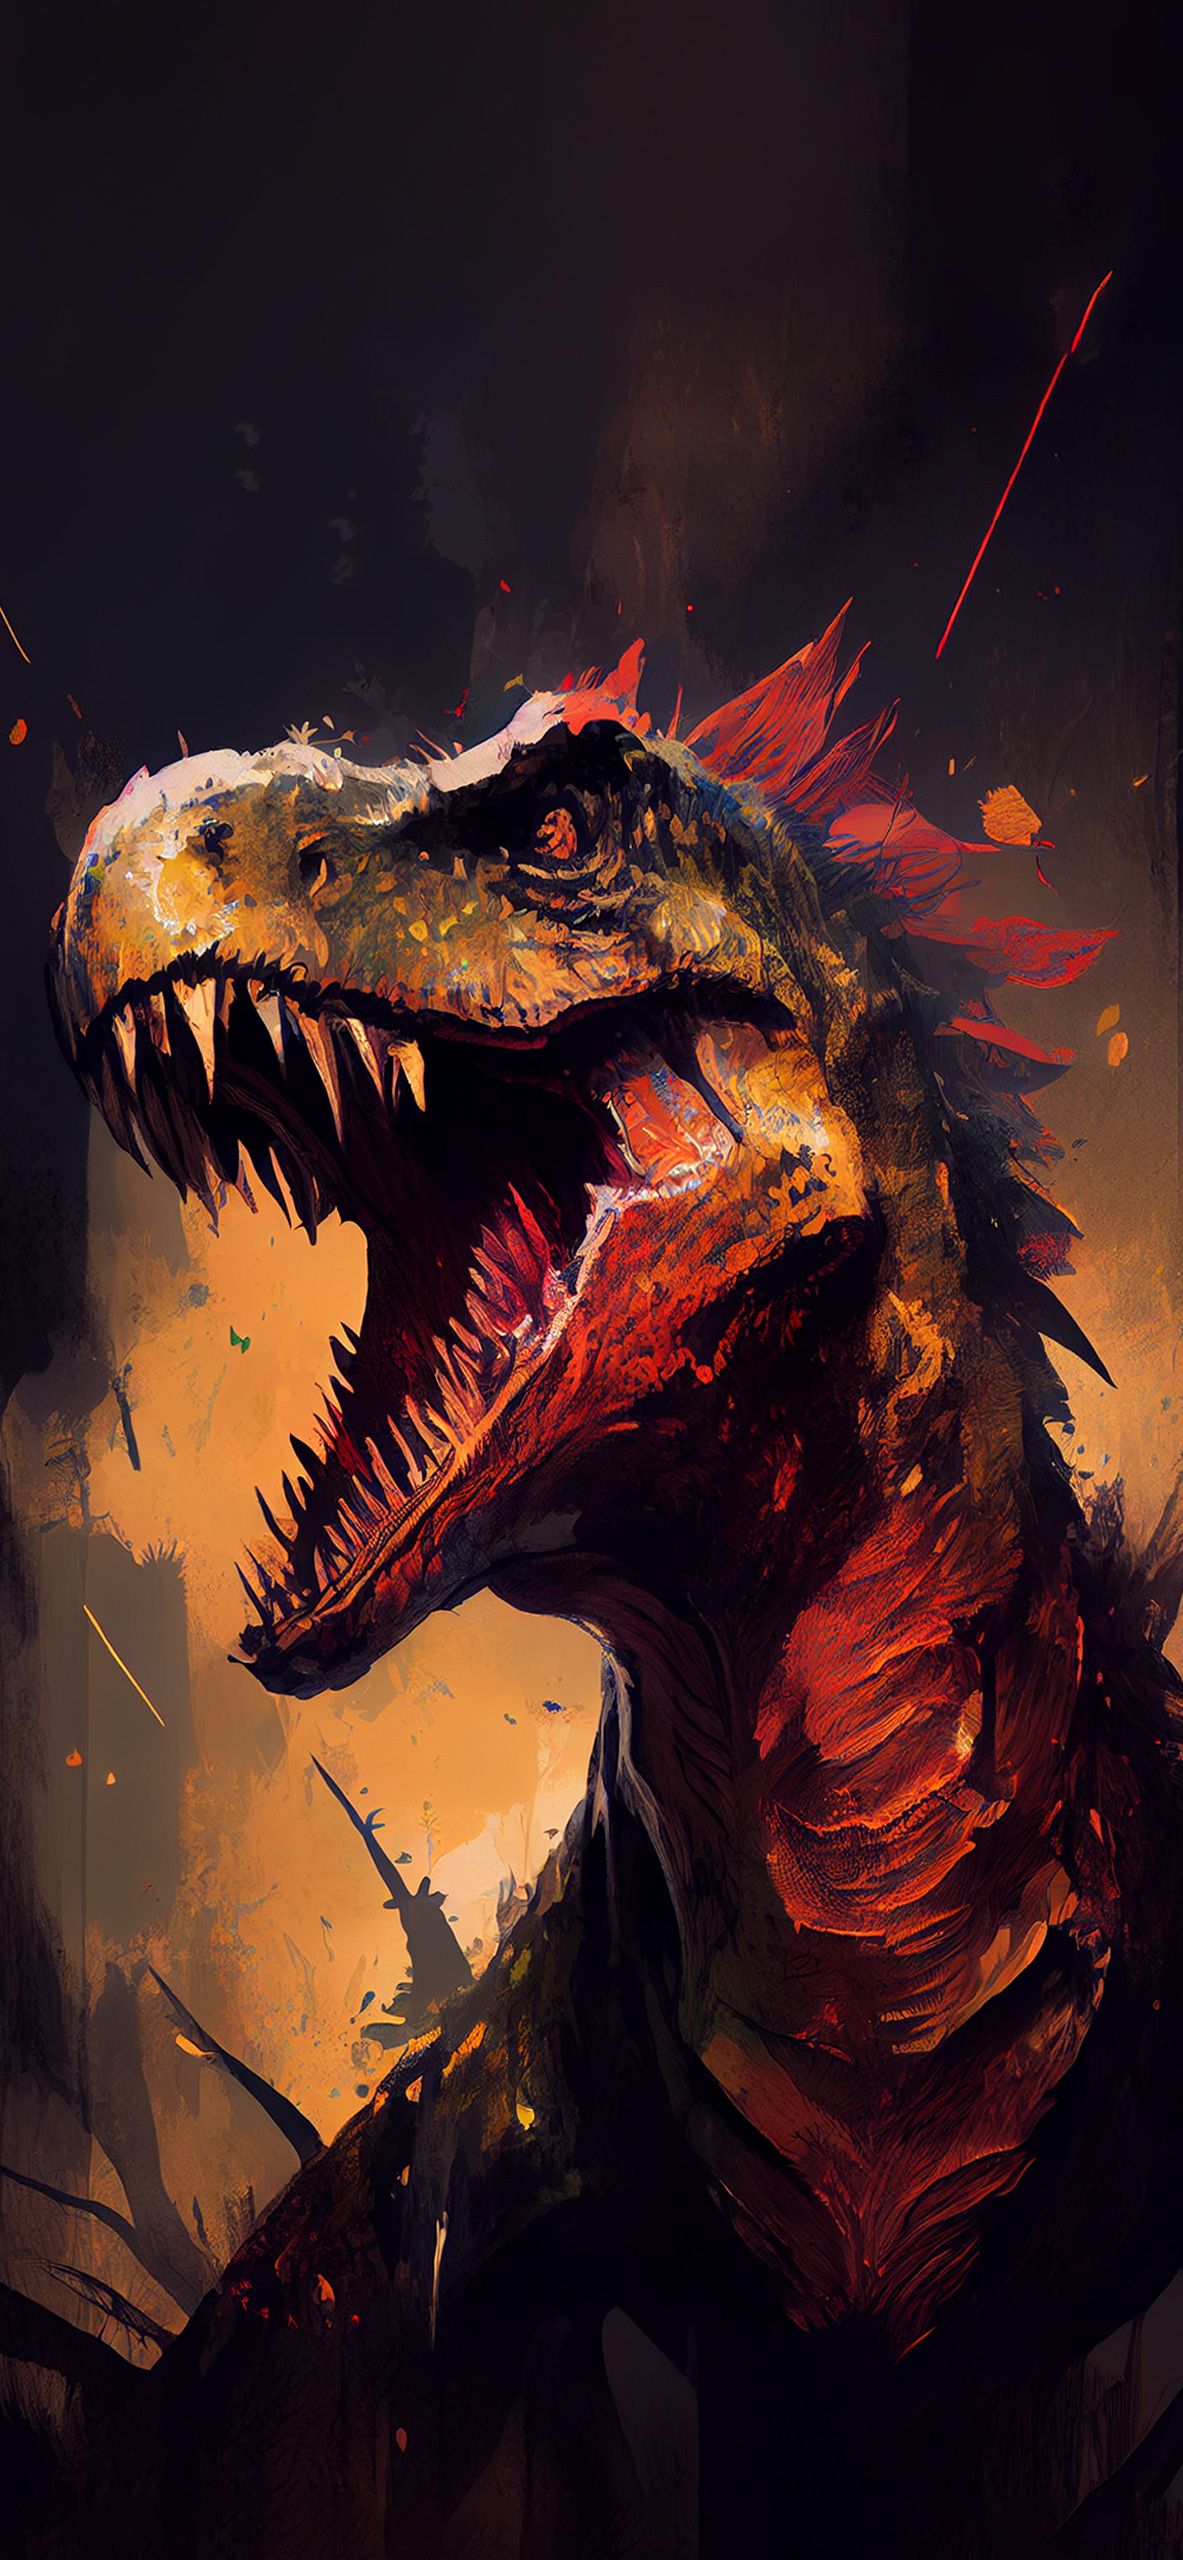 A red and orange fire breathing dragon with sharp teeth - Dinosaur